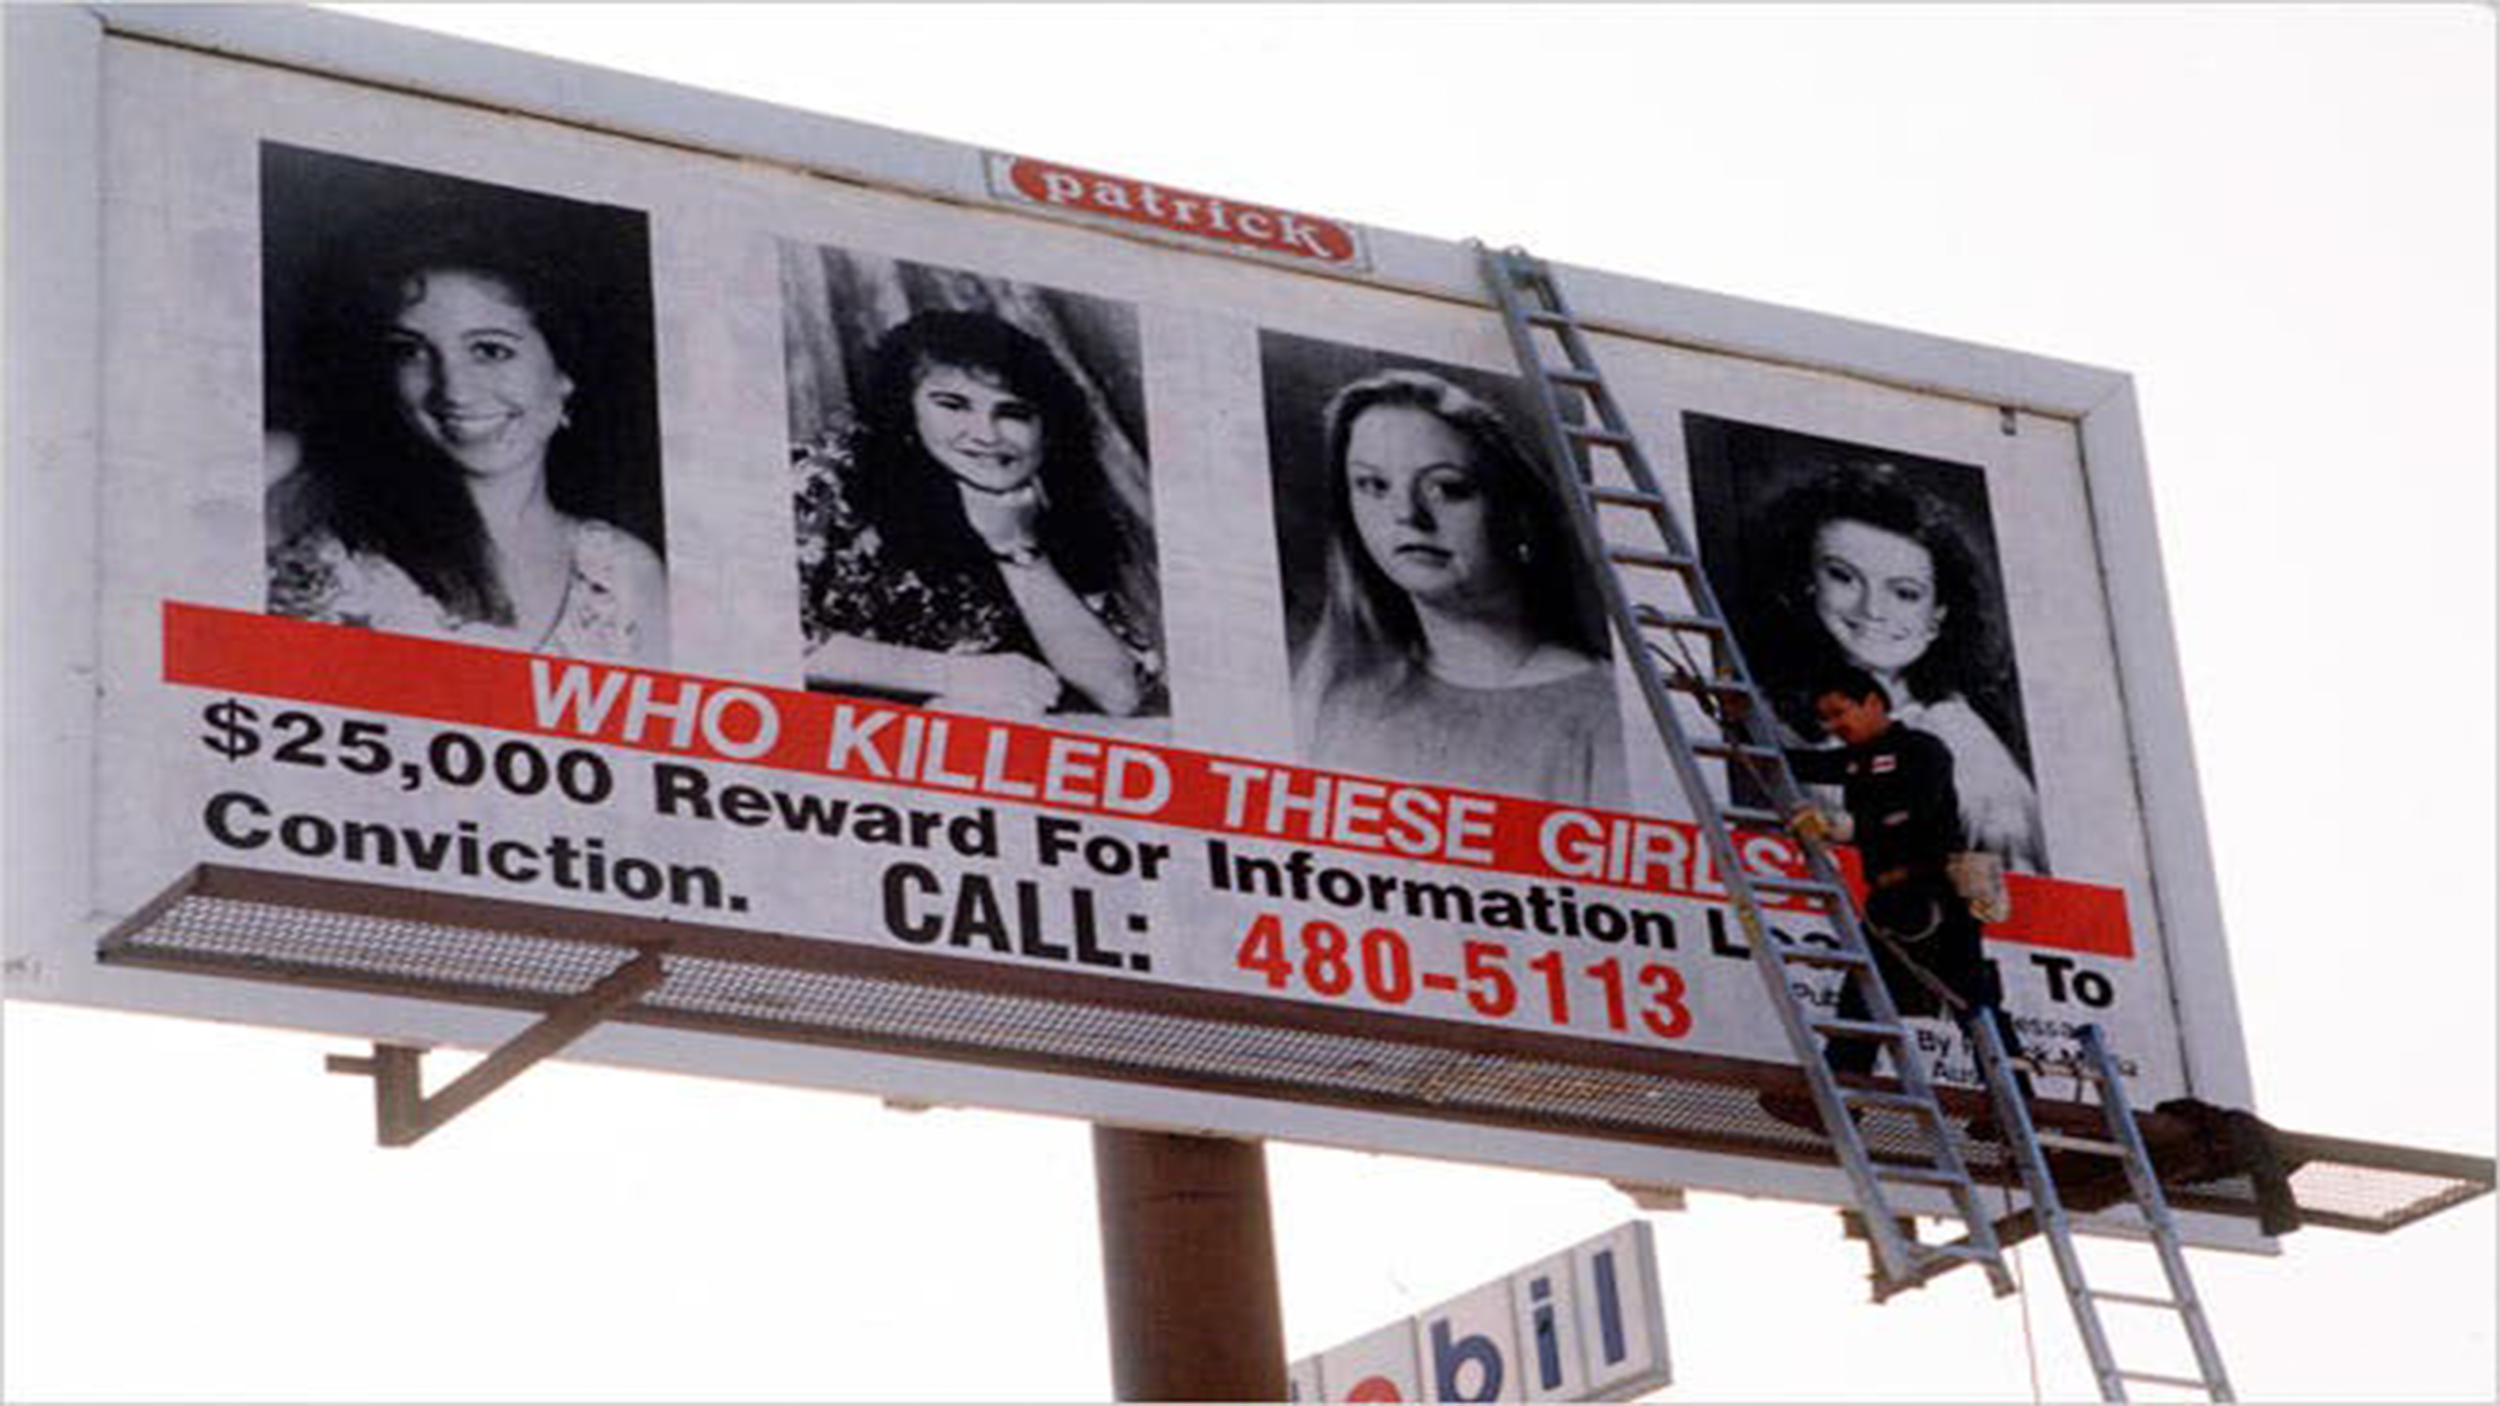   The Austin Yogurt Shop Murders   On December 6th, 1991, tragedy would strike in Austin, TX. Four young women had been brutally killed, and decades later, questions continue to linger…     Learn More  